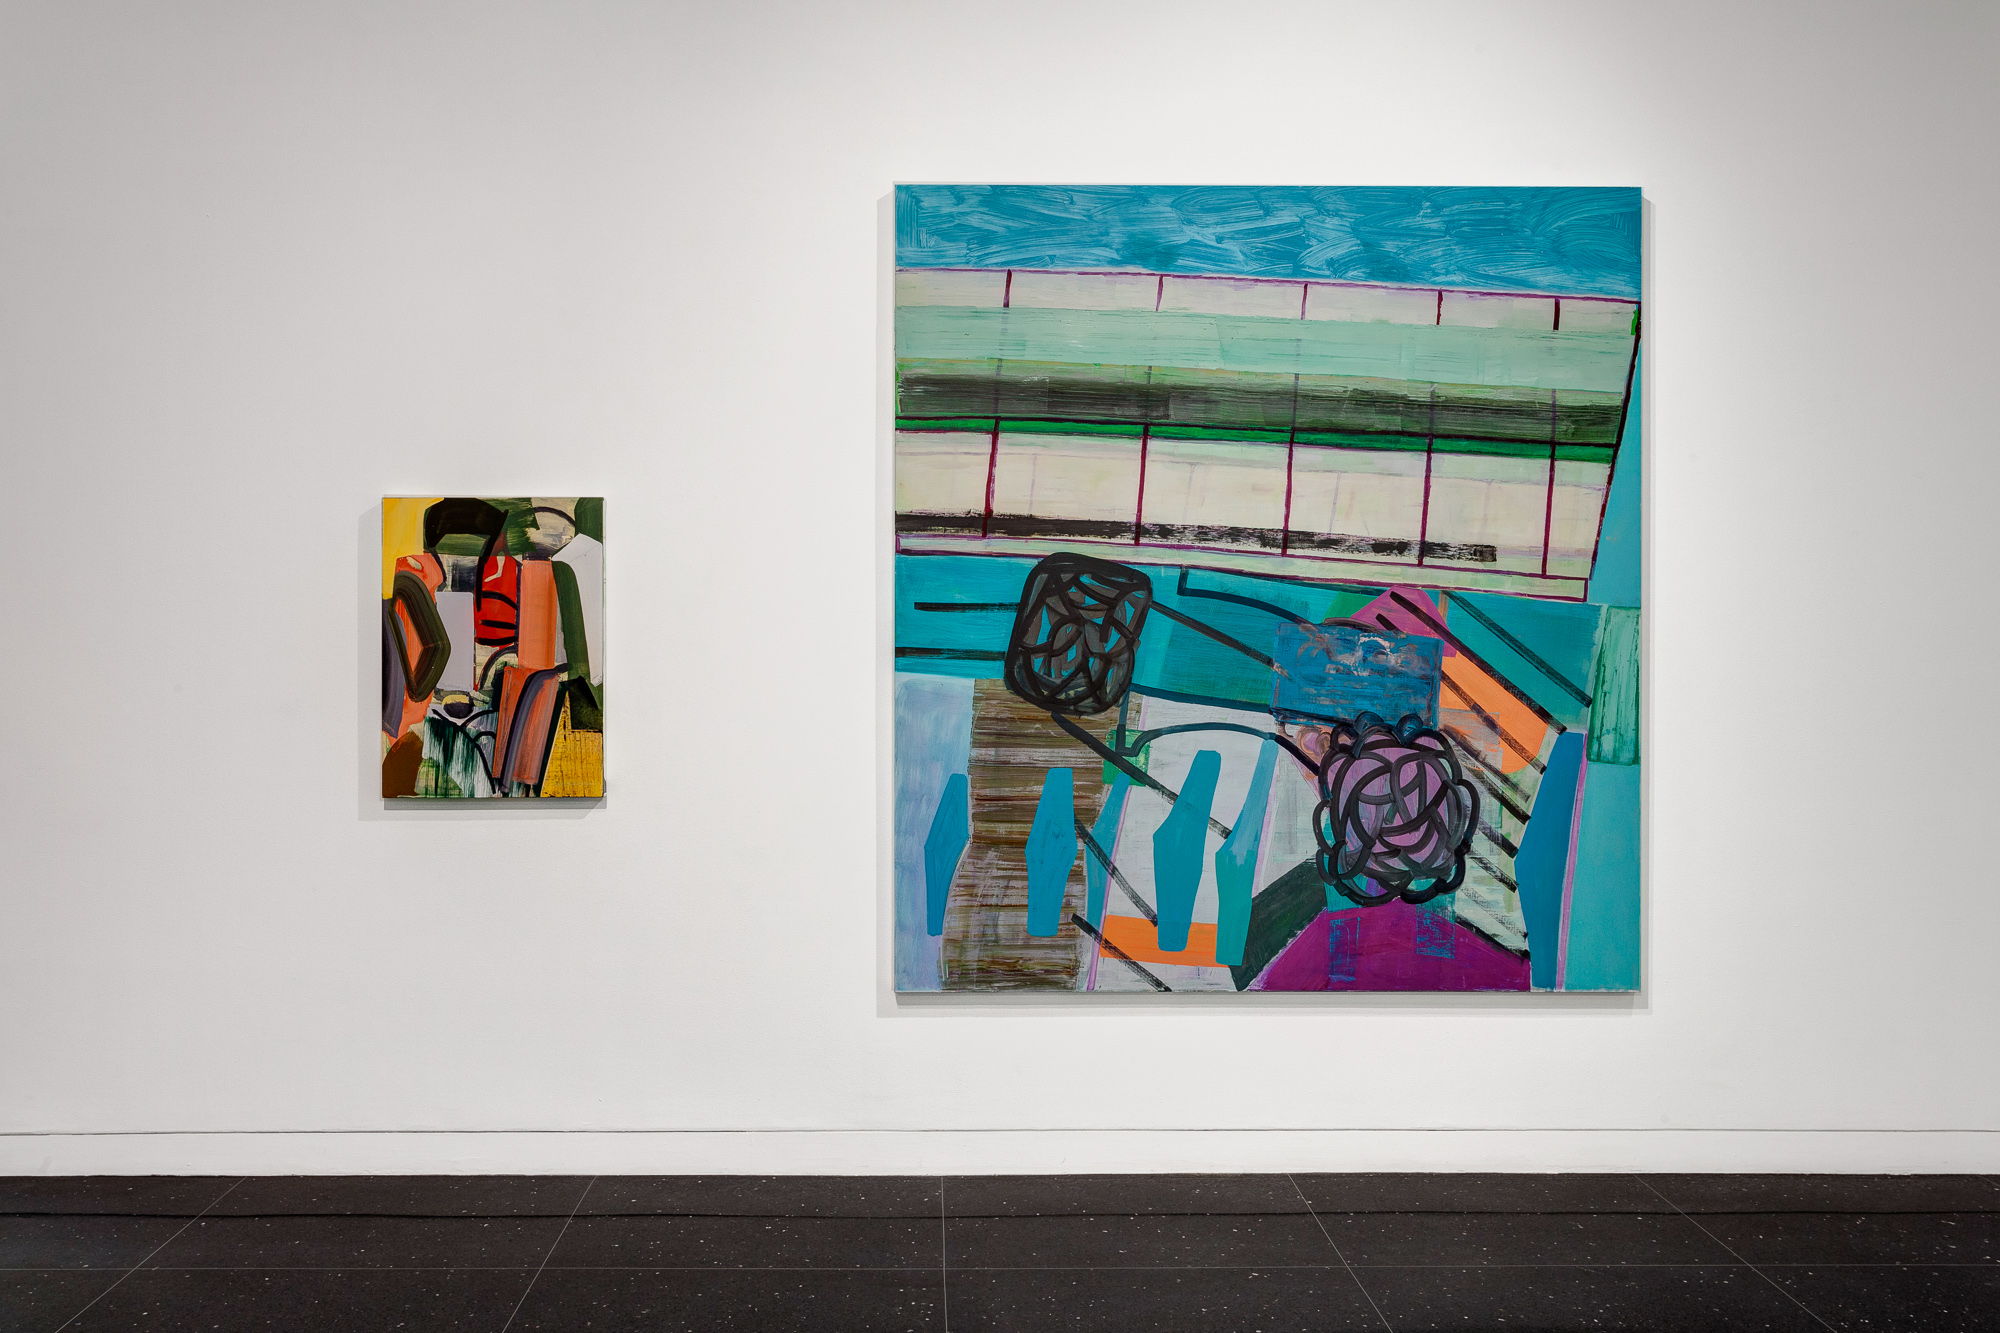 Two paintings on a white gallery wall. The left painting is small and depicts an abstract geometric scene in oranges and yellows. The right image is a large, square, and mostly blue abstracted still life painting.